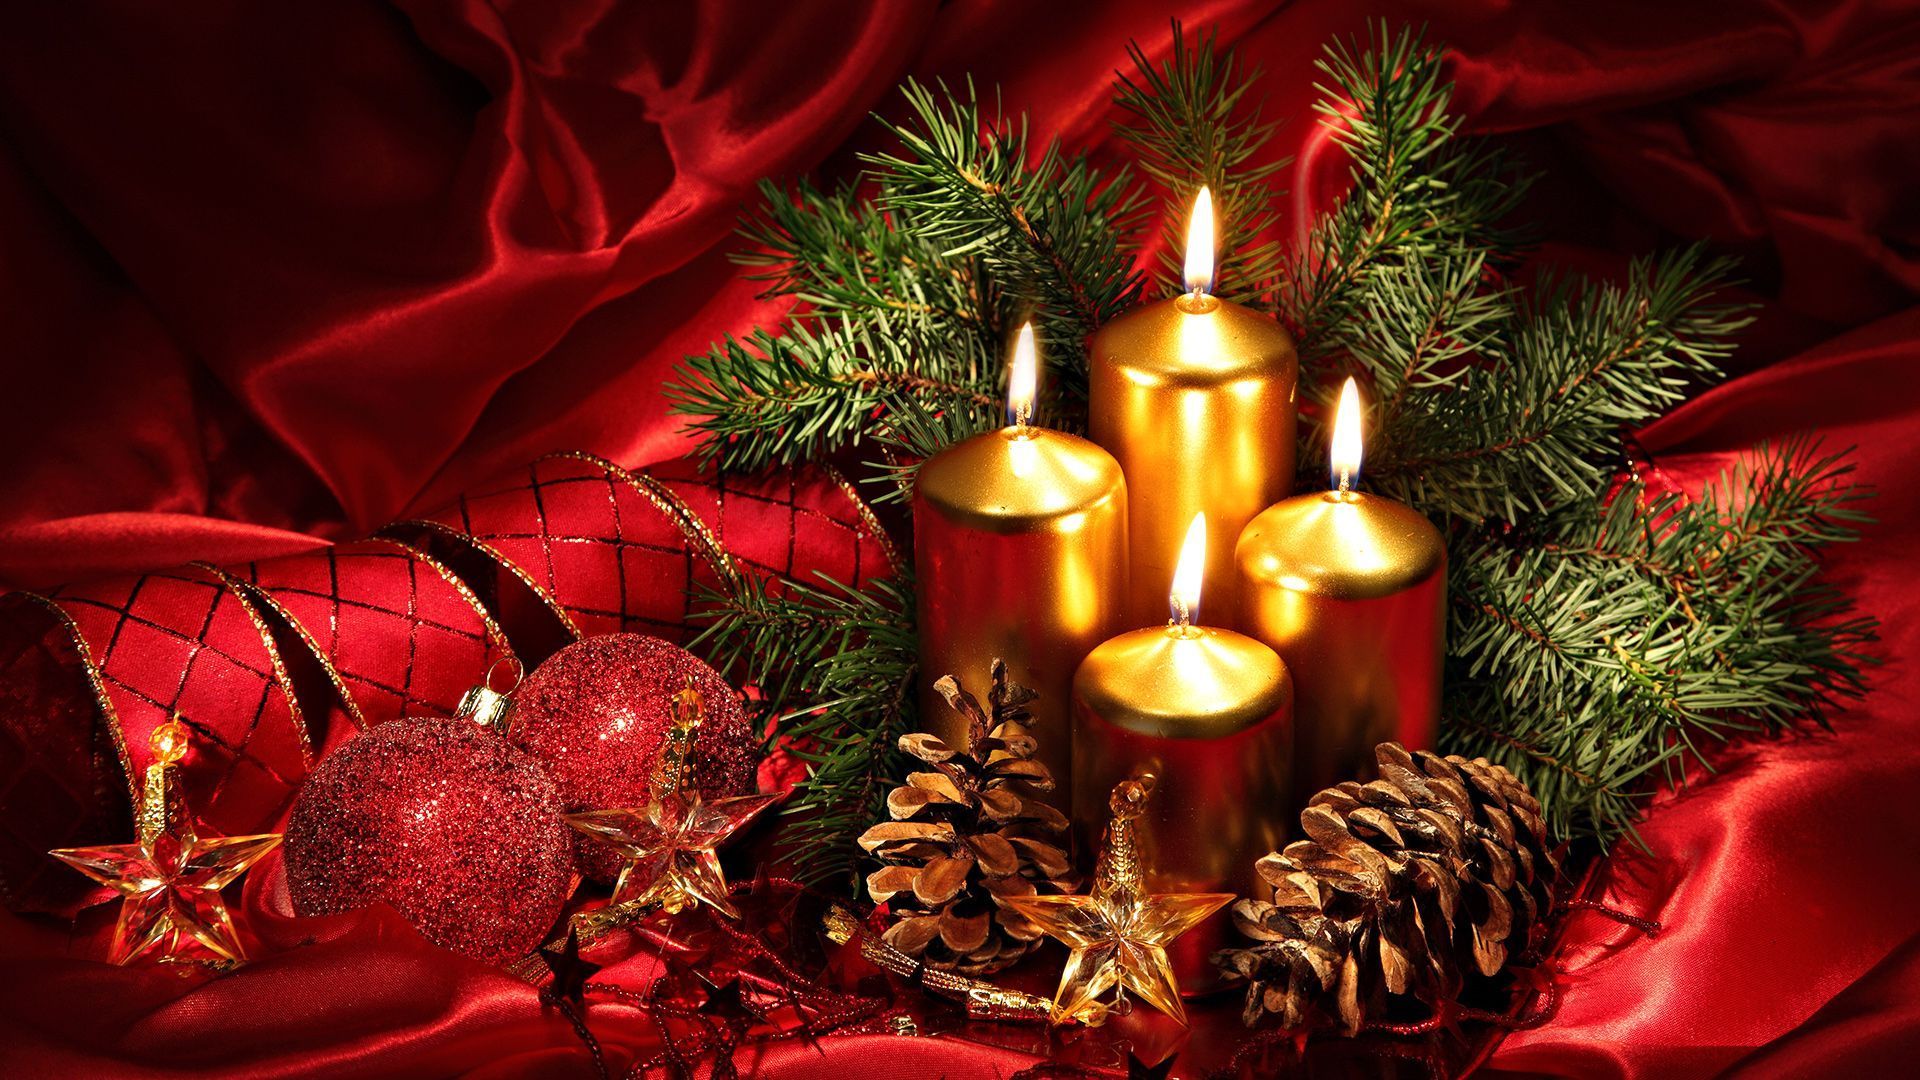 hd Christmas wallpapers - photos, pictures, images, pics | Full ...